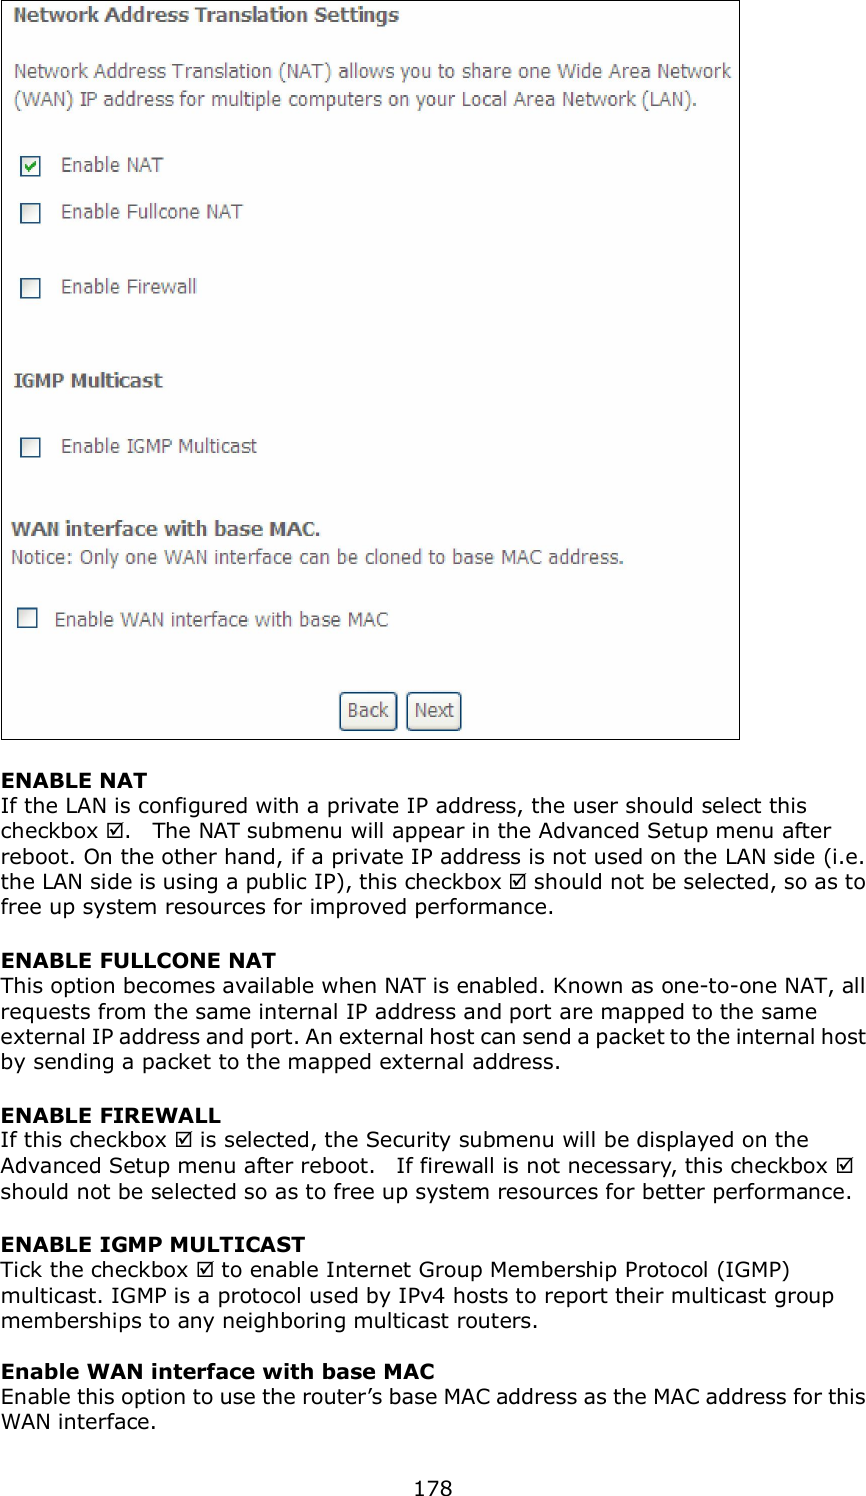  178  ENABLE NAT If the LAN is configured with a private IP address, the user should select this checkbox .    The NAT submenu will appear in the Advanced Setup menu after reboot. On the other hand, if a private IP address is not used on the LAN side (i.e. the LAN side is using a public IP), this checkbox  should not be selected, so as to free up system resources for improved performance. ENABLE FULLCONE NAT This option becomes available when NAT is enabled. Known as one-to-one NAT, all requests from the same internal IP address and port are mapped to the same external IP address and port. An external host can send a packet to the internal host by sending a packet to the mapped external address. ENABLE FIREWALL If this checkbox  is selected, the Security submenu will be displayed on the Advanced Setup menu after reboot.    If firewall is not necessary, this checkbox  should not be selected so as to free up system resources for better performance.     ENABLE IGMP MULTICAST Tick the checkbox  to enable Internet Group Membership Protocol (IGMP) multicast. IGMP is a protocol used by IPv4 hosts to report their multicast group memberships to any neighboring multicast routers.    Enable WAN interface with base MAC  Enable this option to use the router’s base MAC address as the MAC address for this WAN interface. 